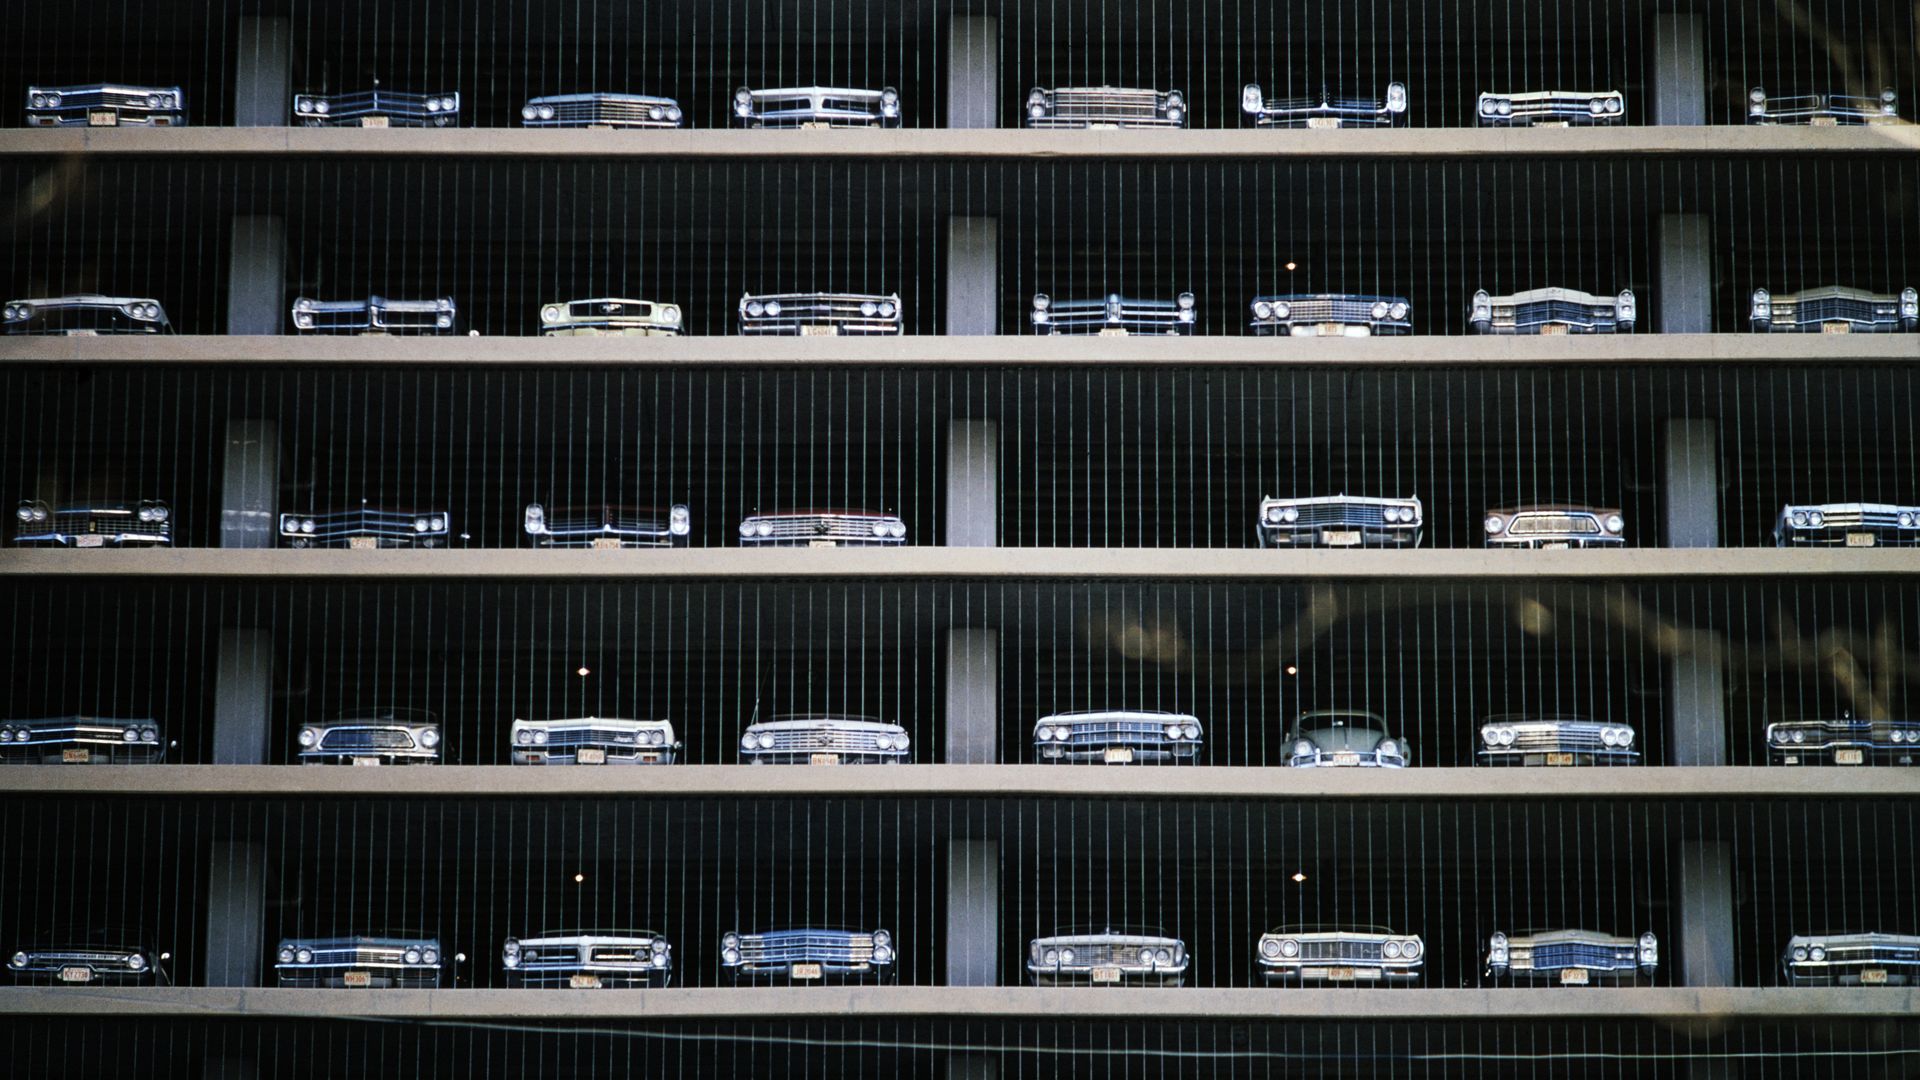 Side view of a parking garage in Chicago from October 1967.